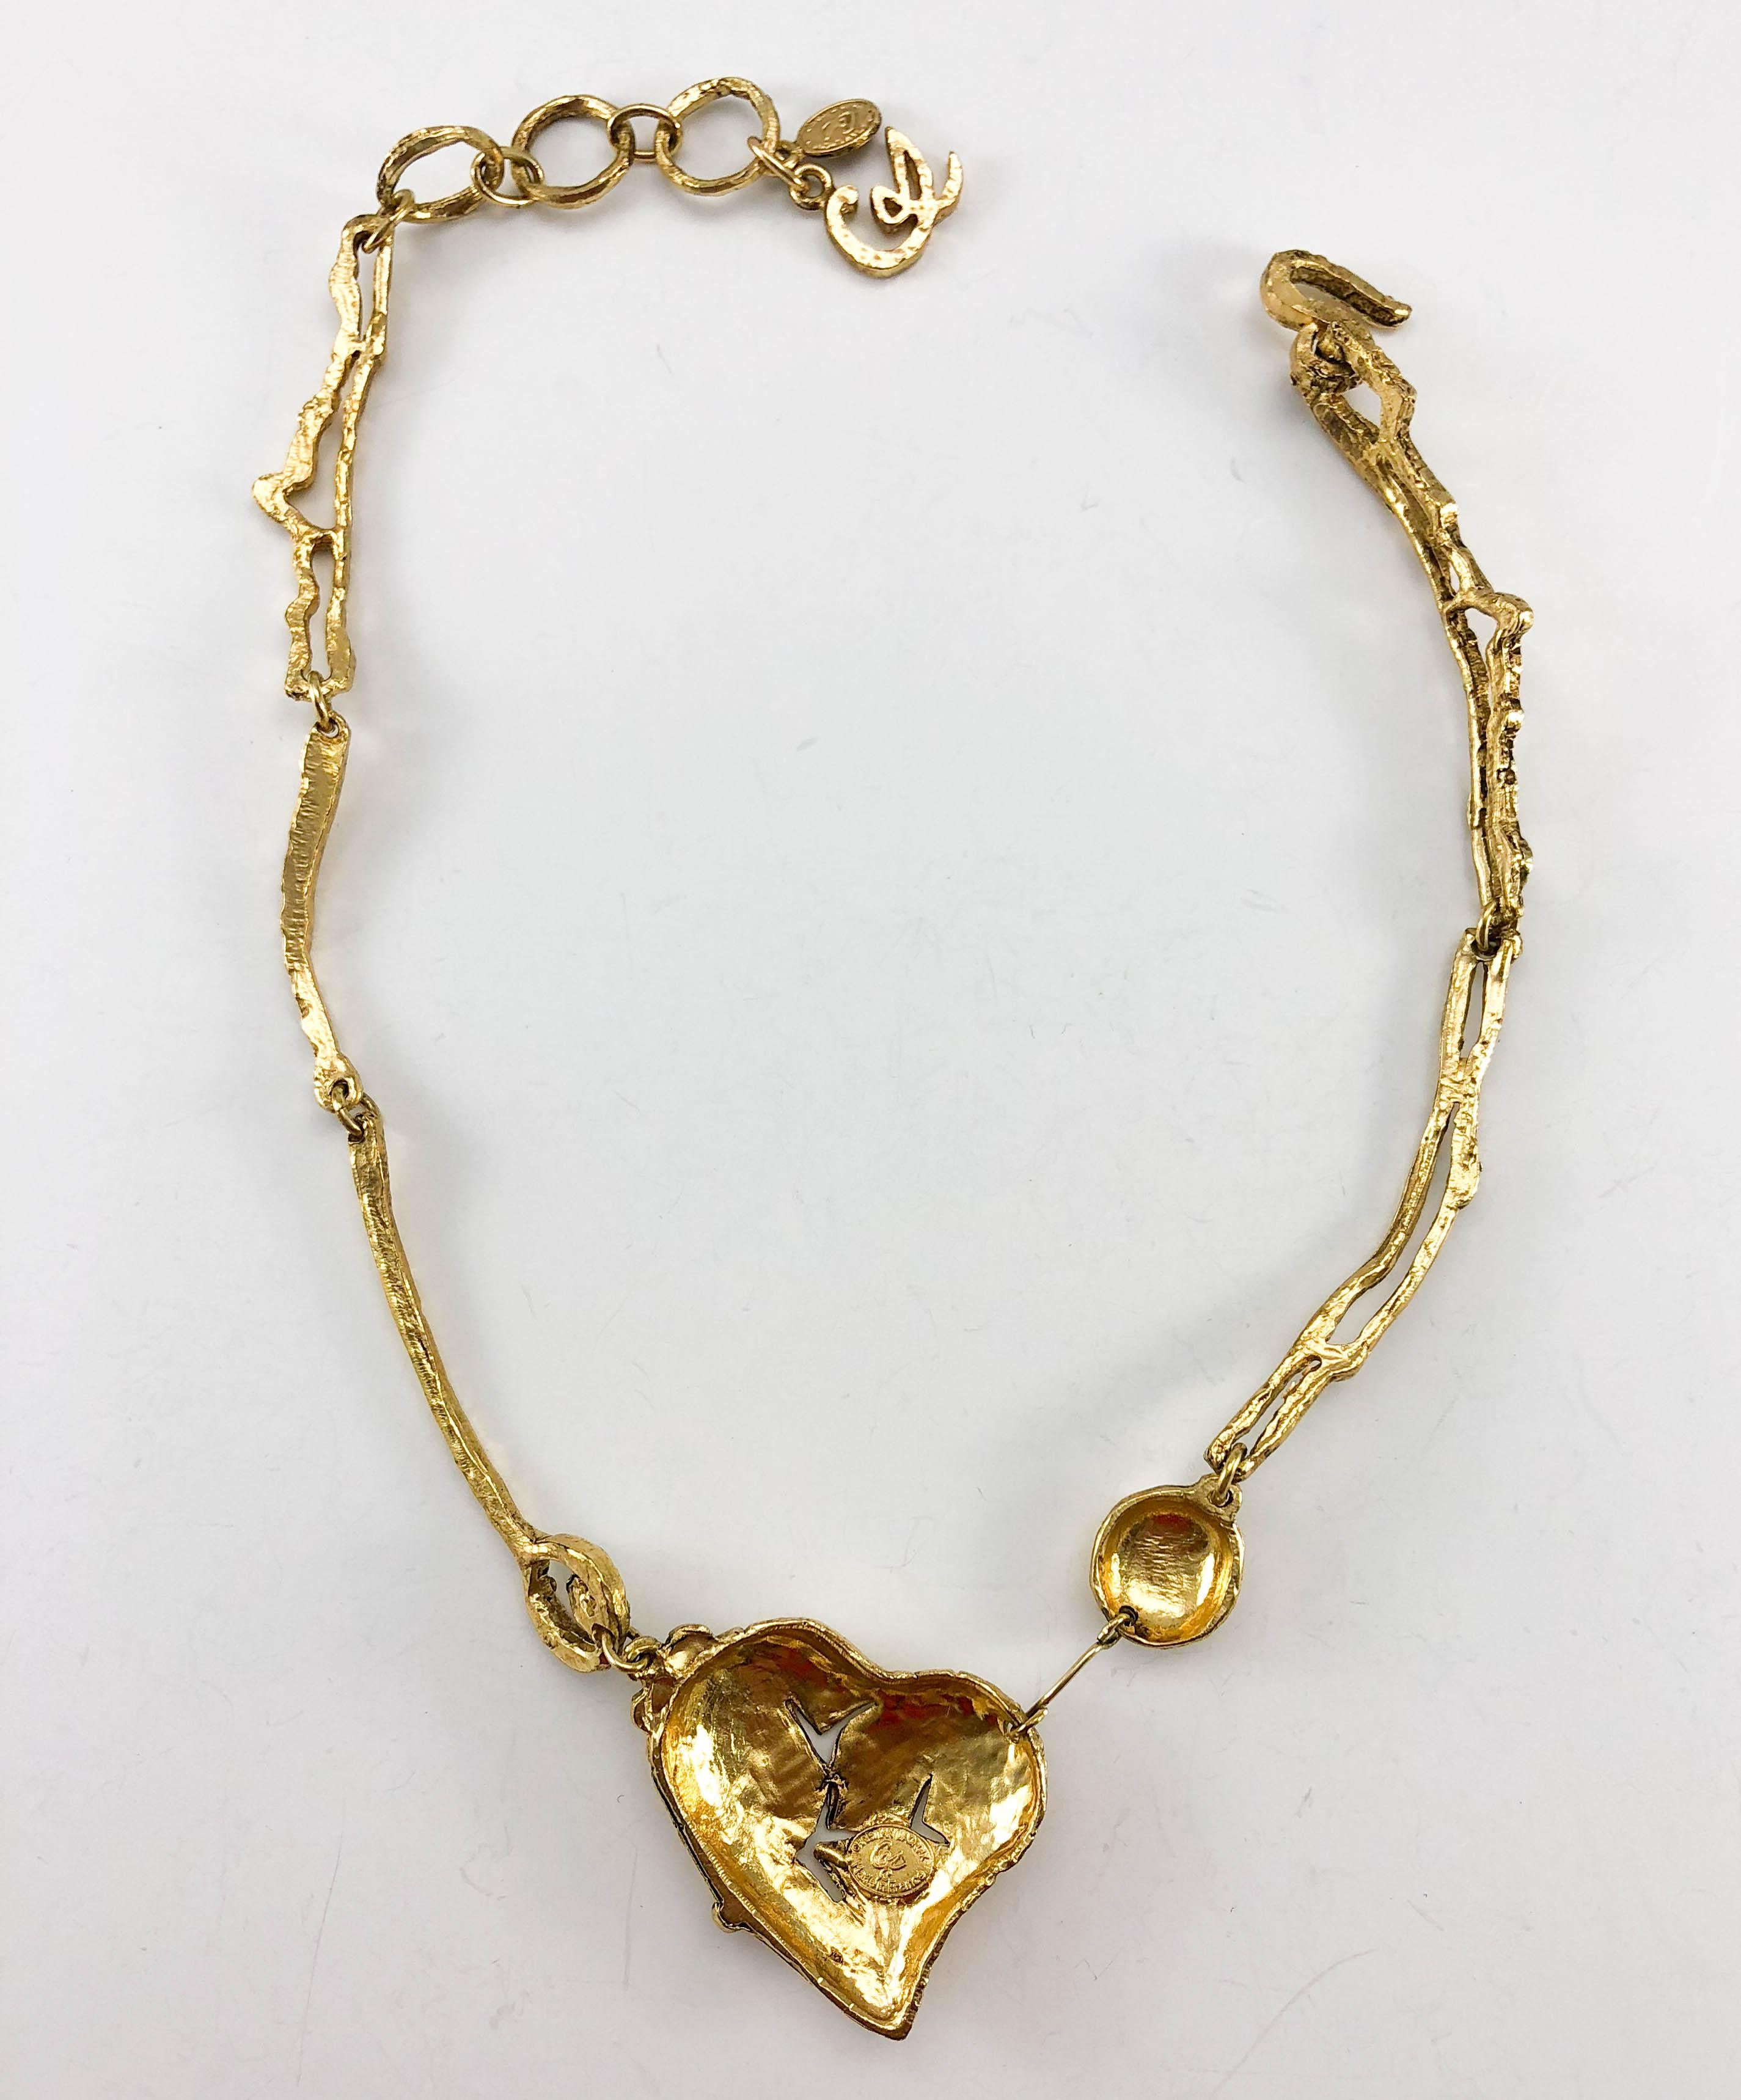 1990's Christian Lacroix Gold-Plated 'Broken Heart' Necklace 10